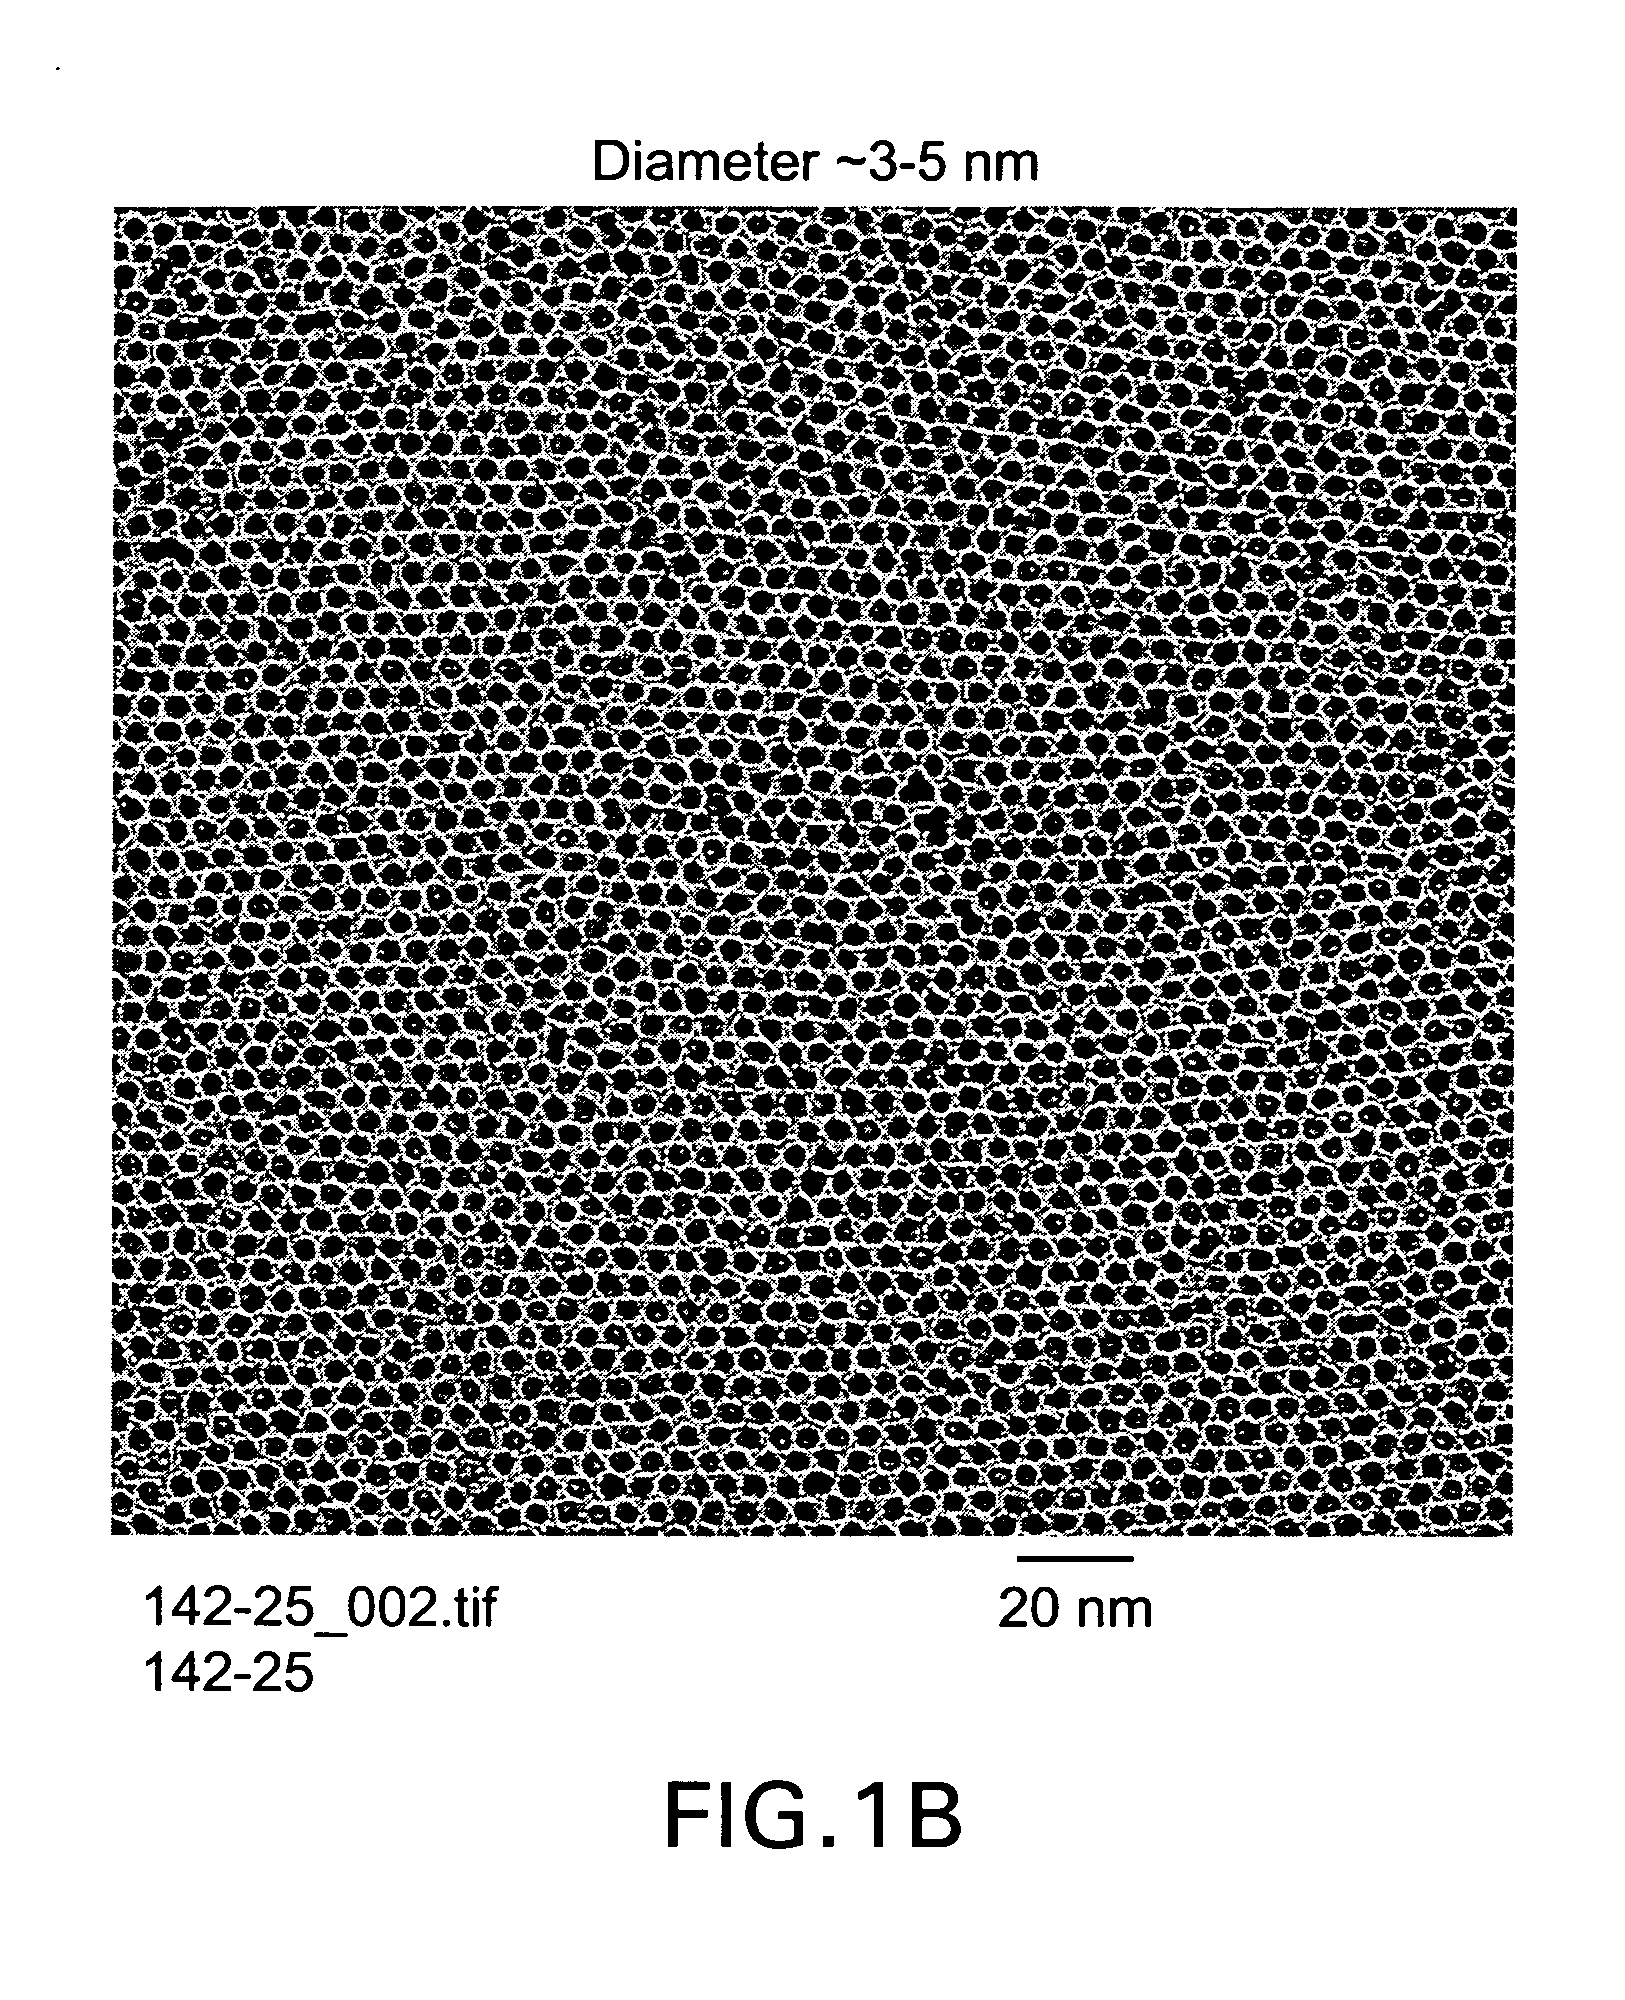 Methods for nanopatterning and production of magnetic nanostructures